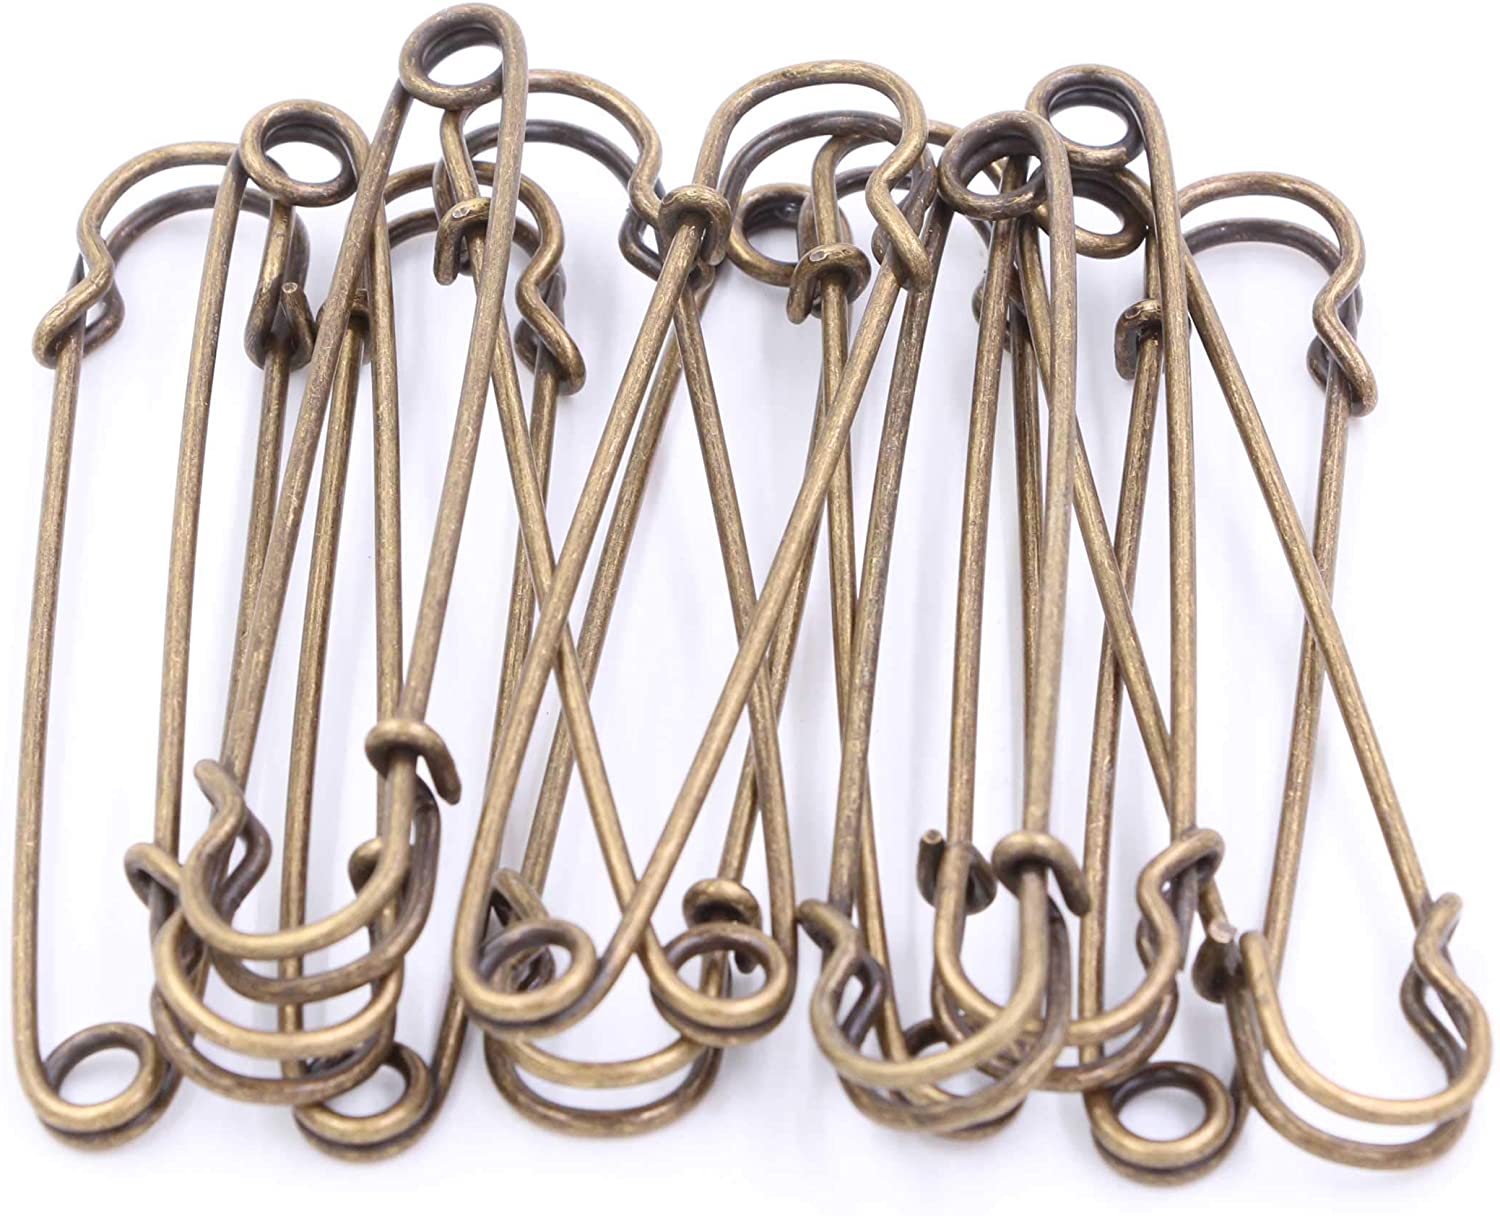 Heavy Duty Safety Pins - Stainless Steel Safety Pins for  Blankets/Skirts/Kilts/Crafts Metal Large 15pcs in Bulk (3/4 inch) 